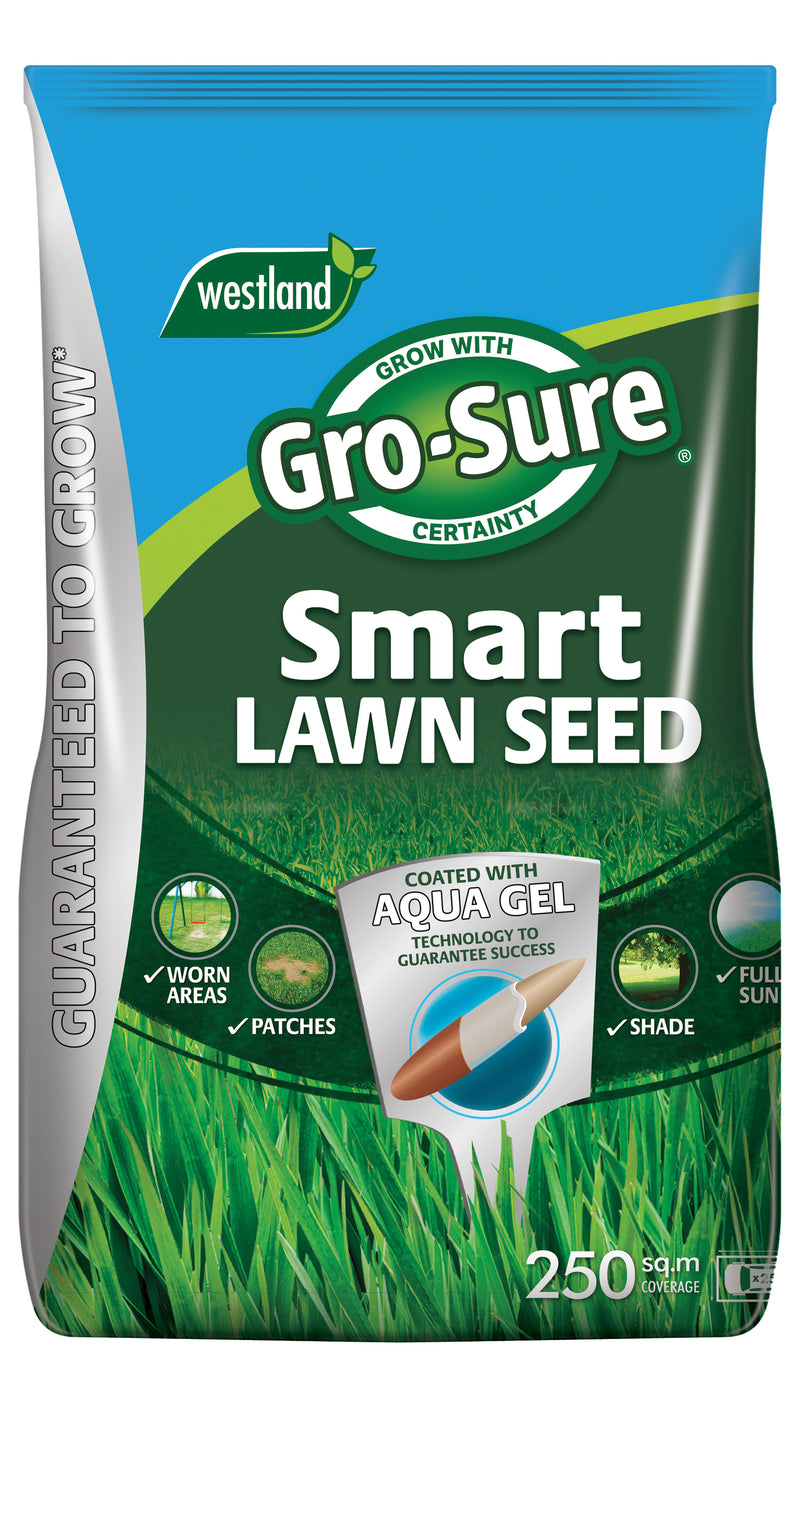 Gro-Sure Smart Lawn Seed, Lawn Care